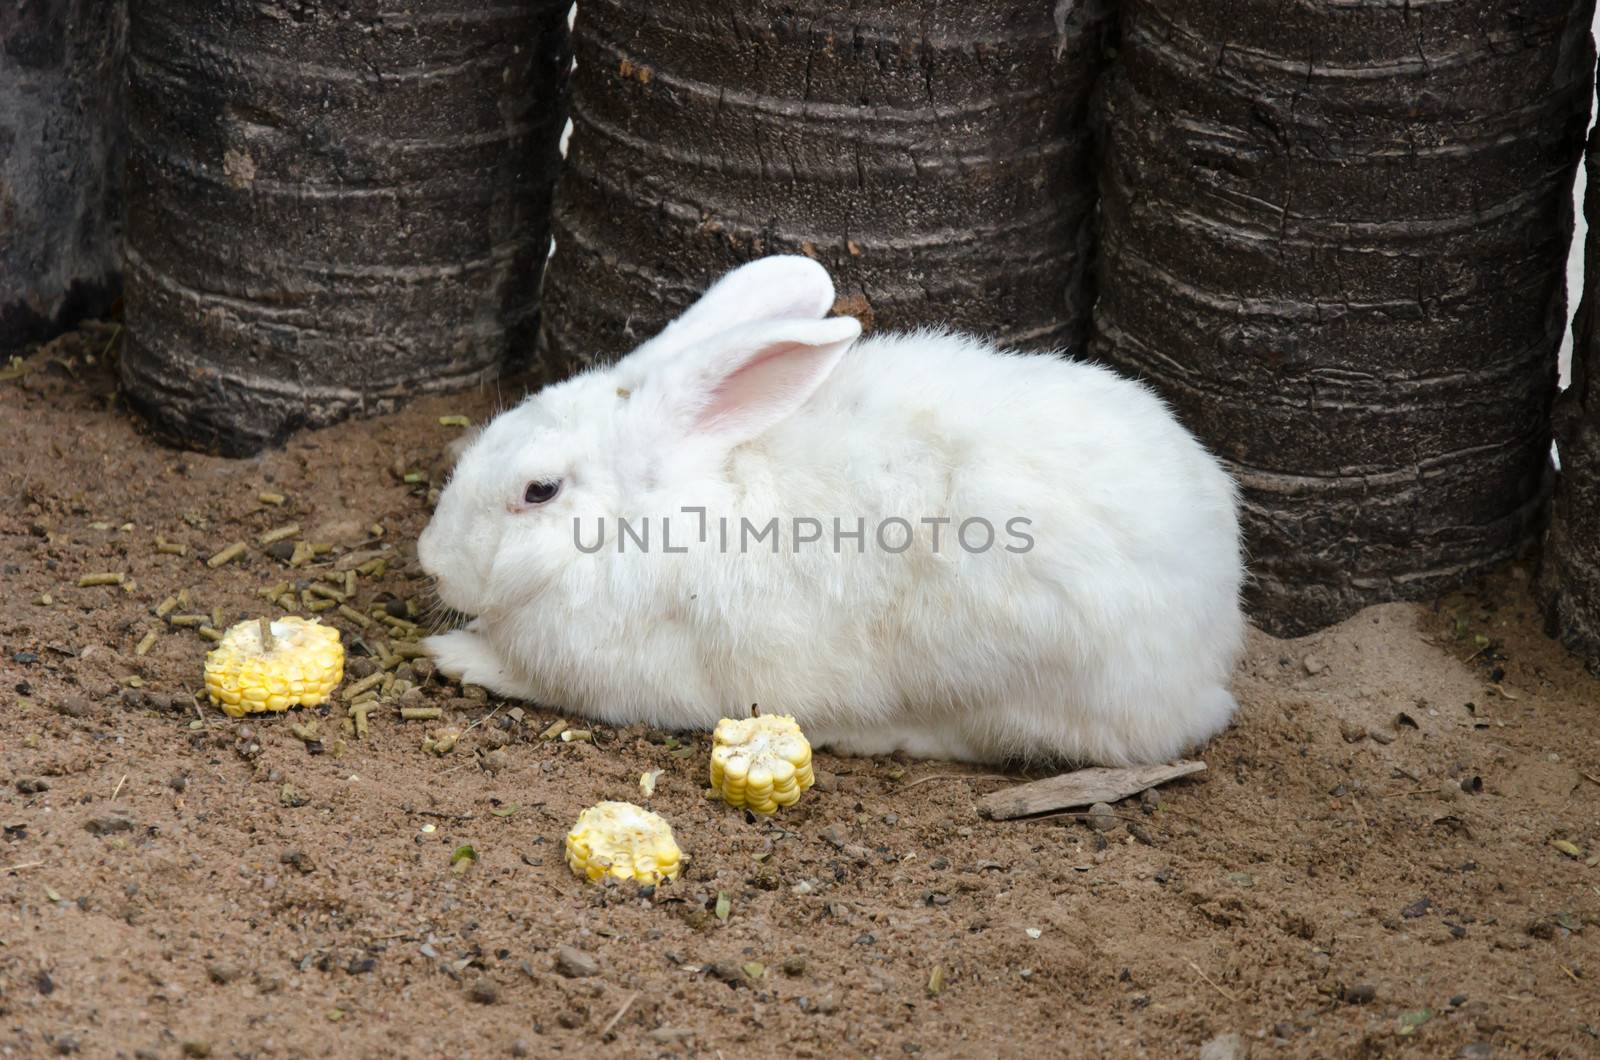 Beautiful white rabbit eating corn placed on the ground.